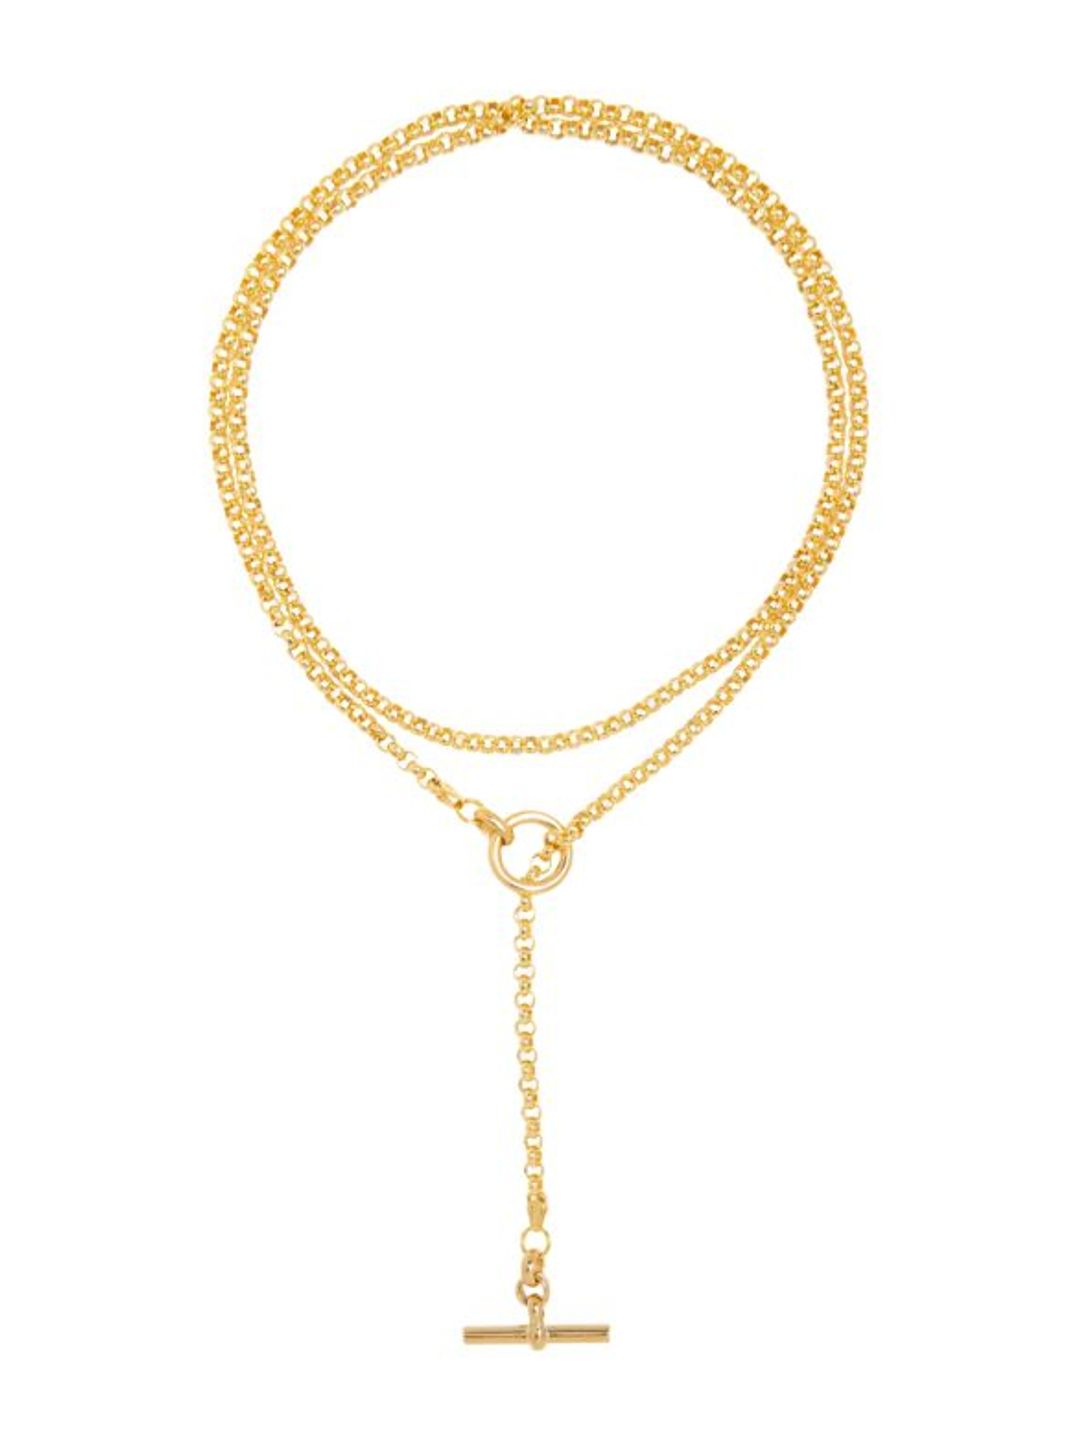 Gold Lariat Necklace - Tilly Sveaas